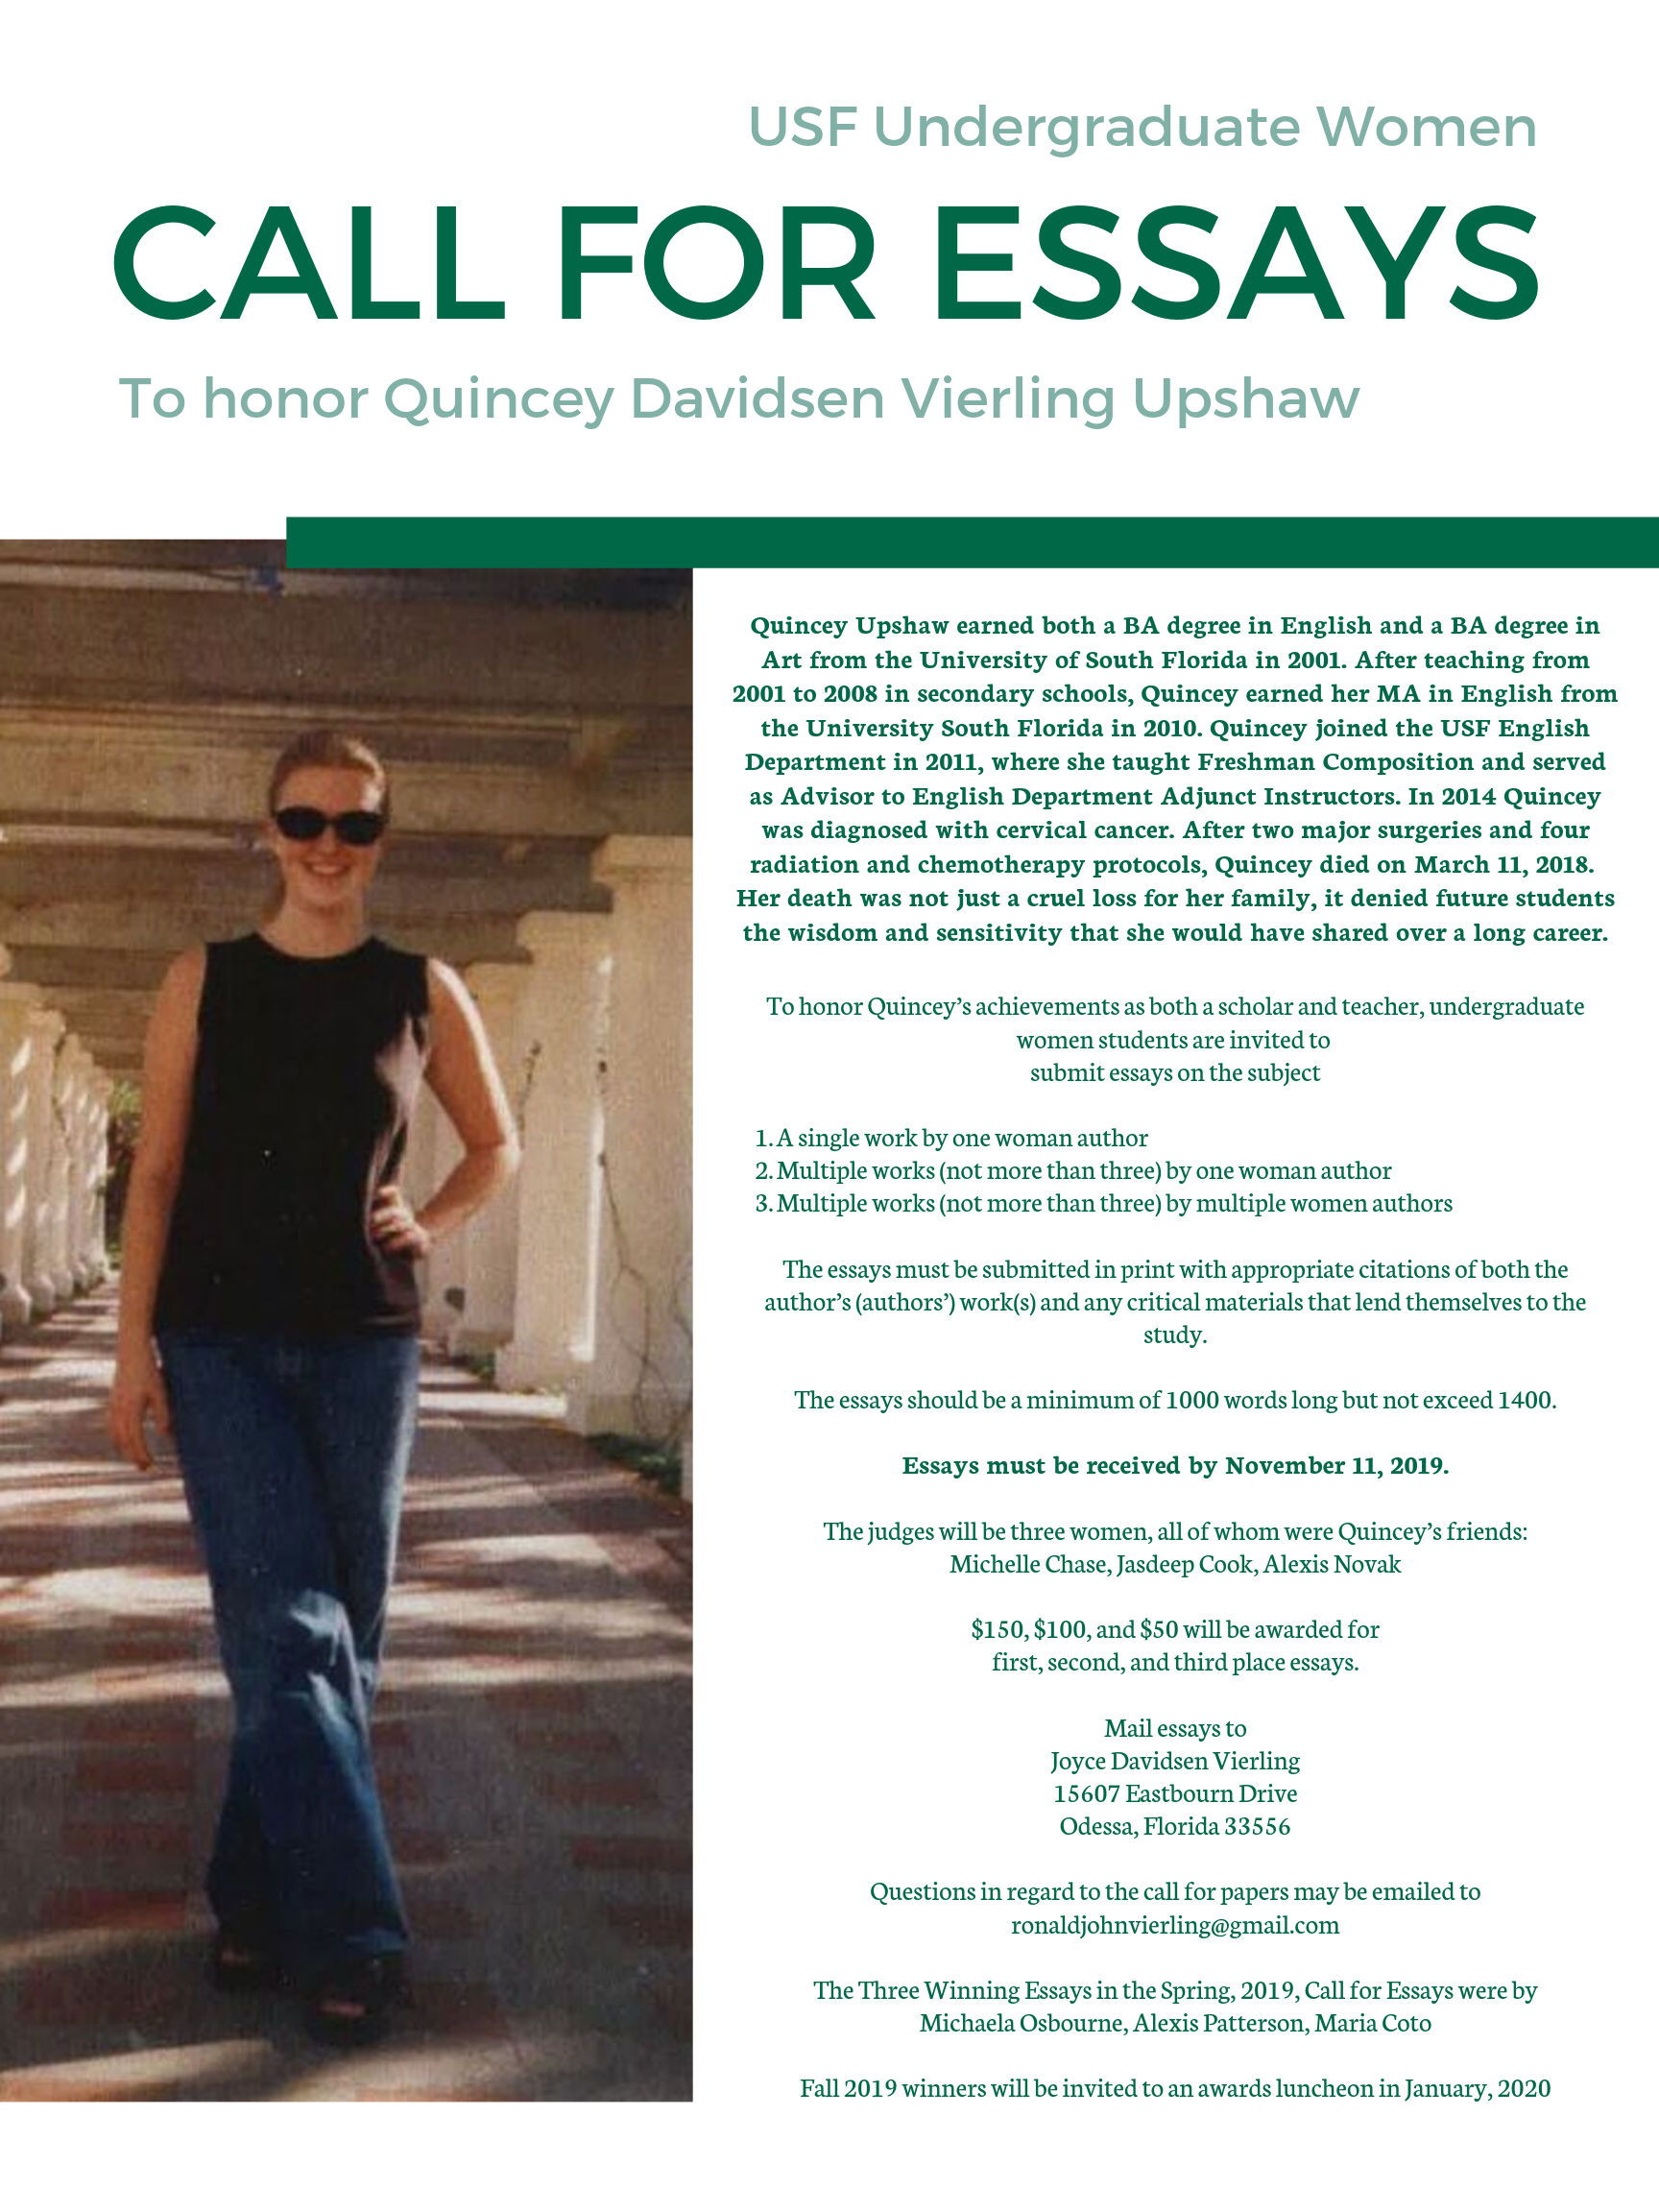 Image shows flyer calling for essays